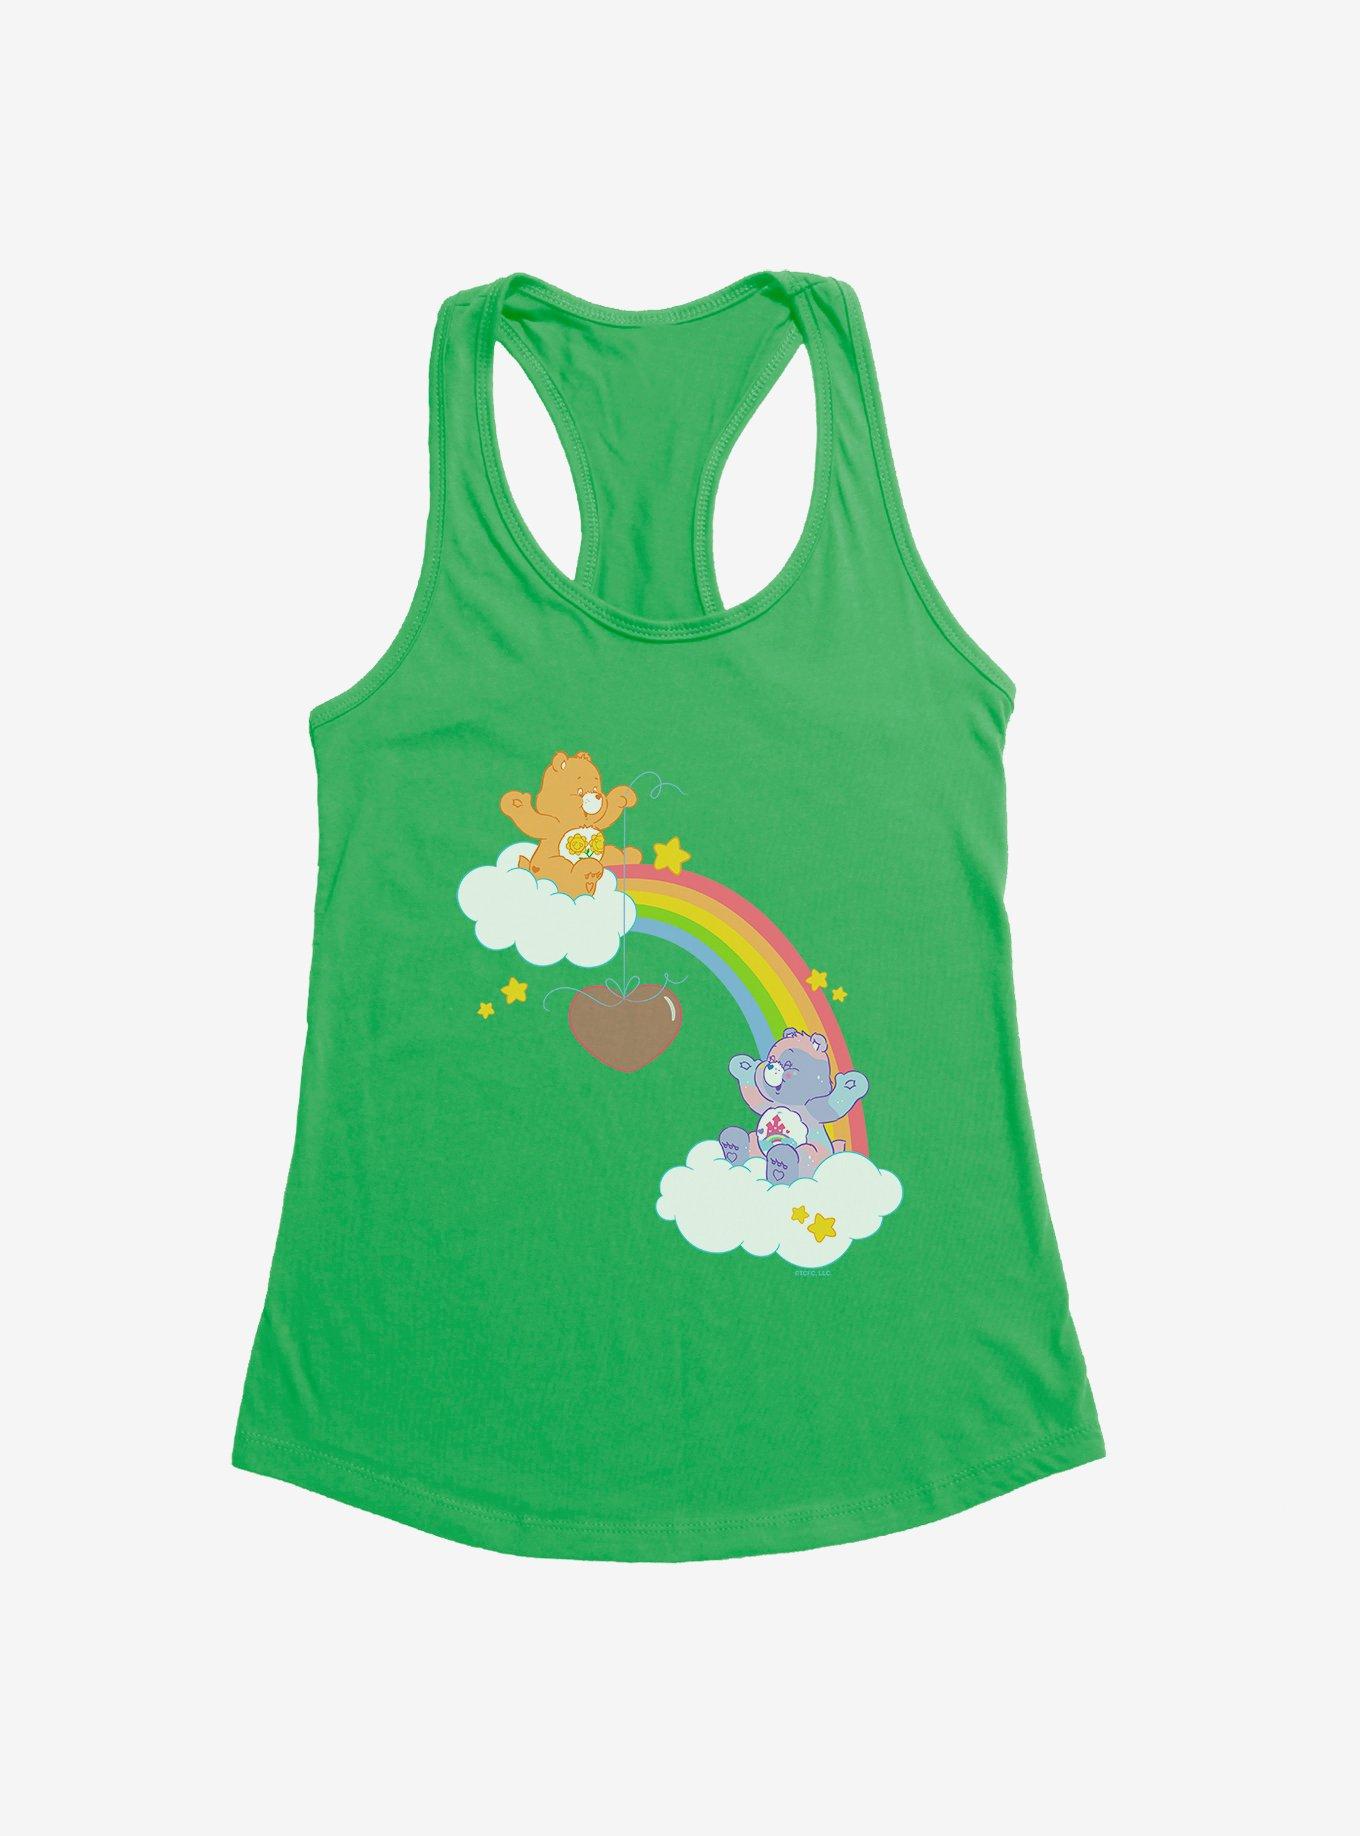 Care Bears Share The Love Girls Tank, KELLY GREEN, hi-res